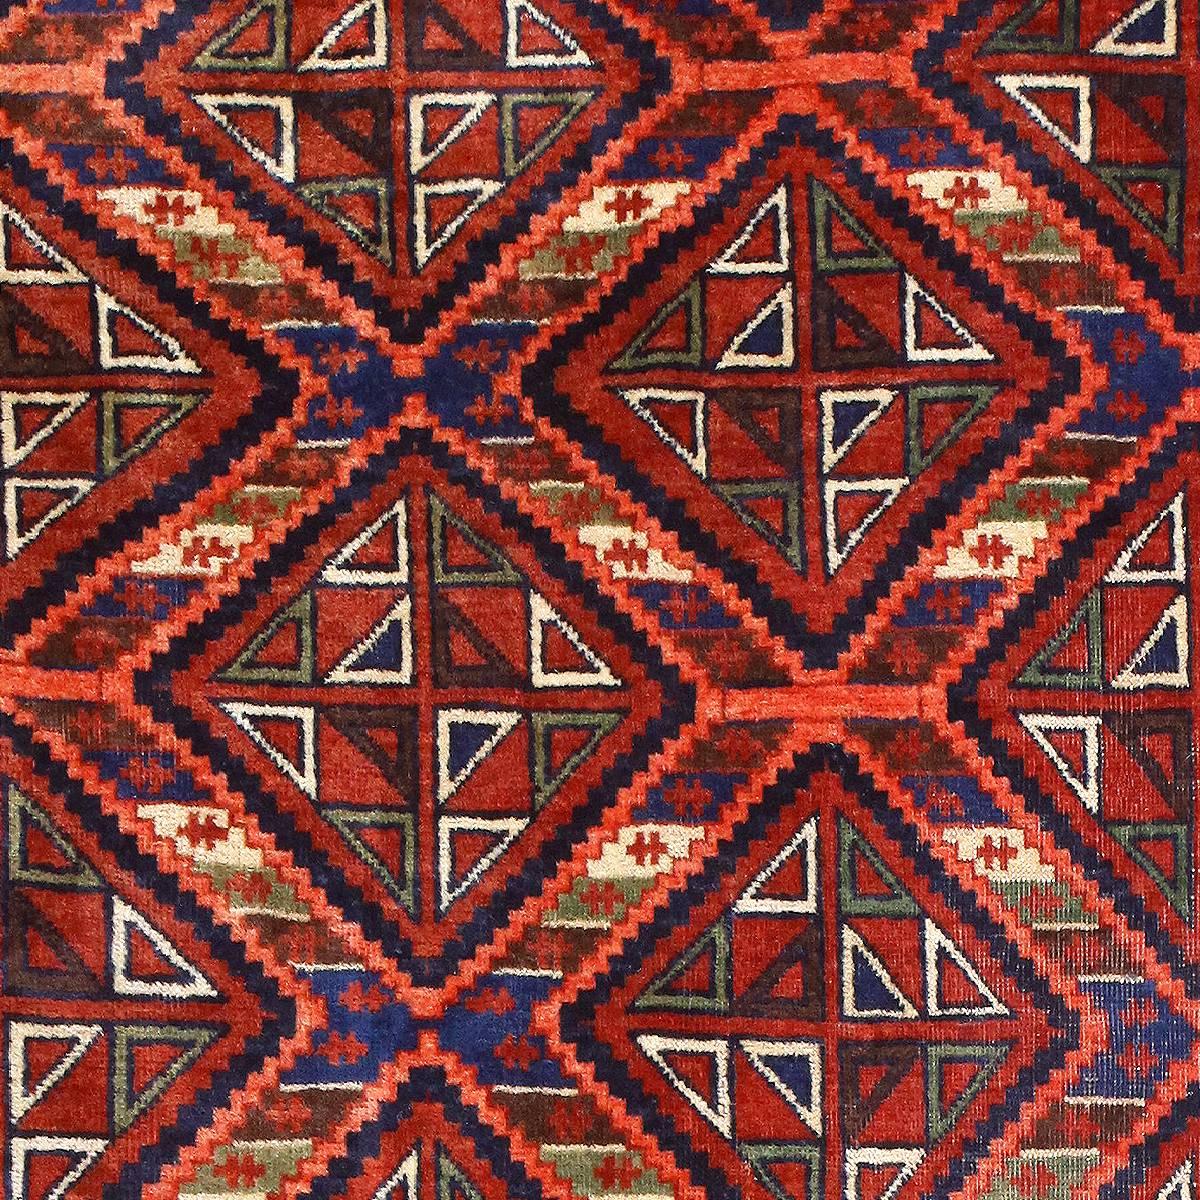 A pattern of diamonds with stair-step edges repeats across the body of this antique Afghan rug, starkly vibrant in red, orange and blue, accented with white, light green and pale yellow. The riot of colors is perfectly organized into a striped